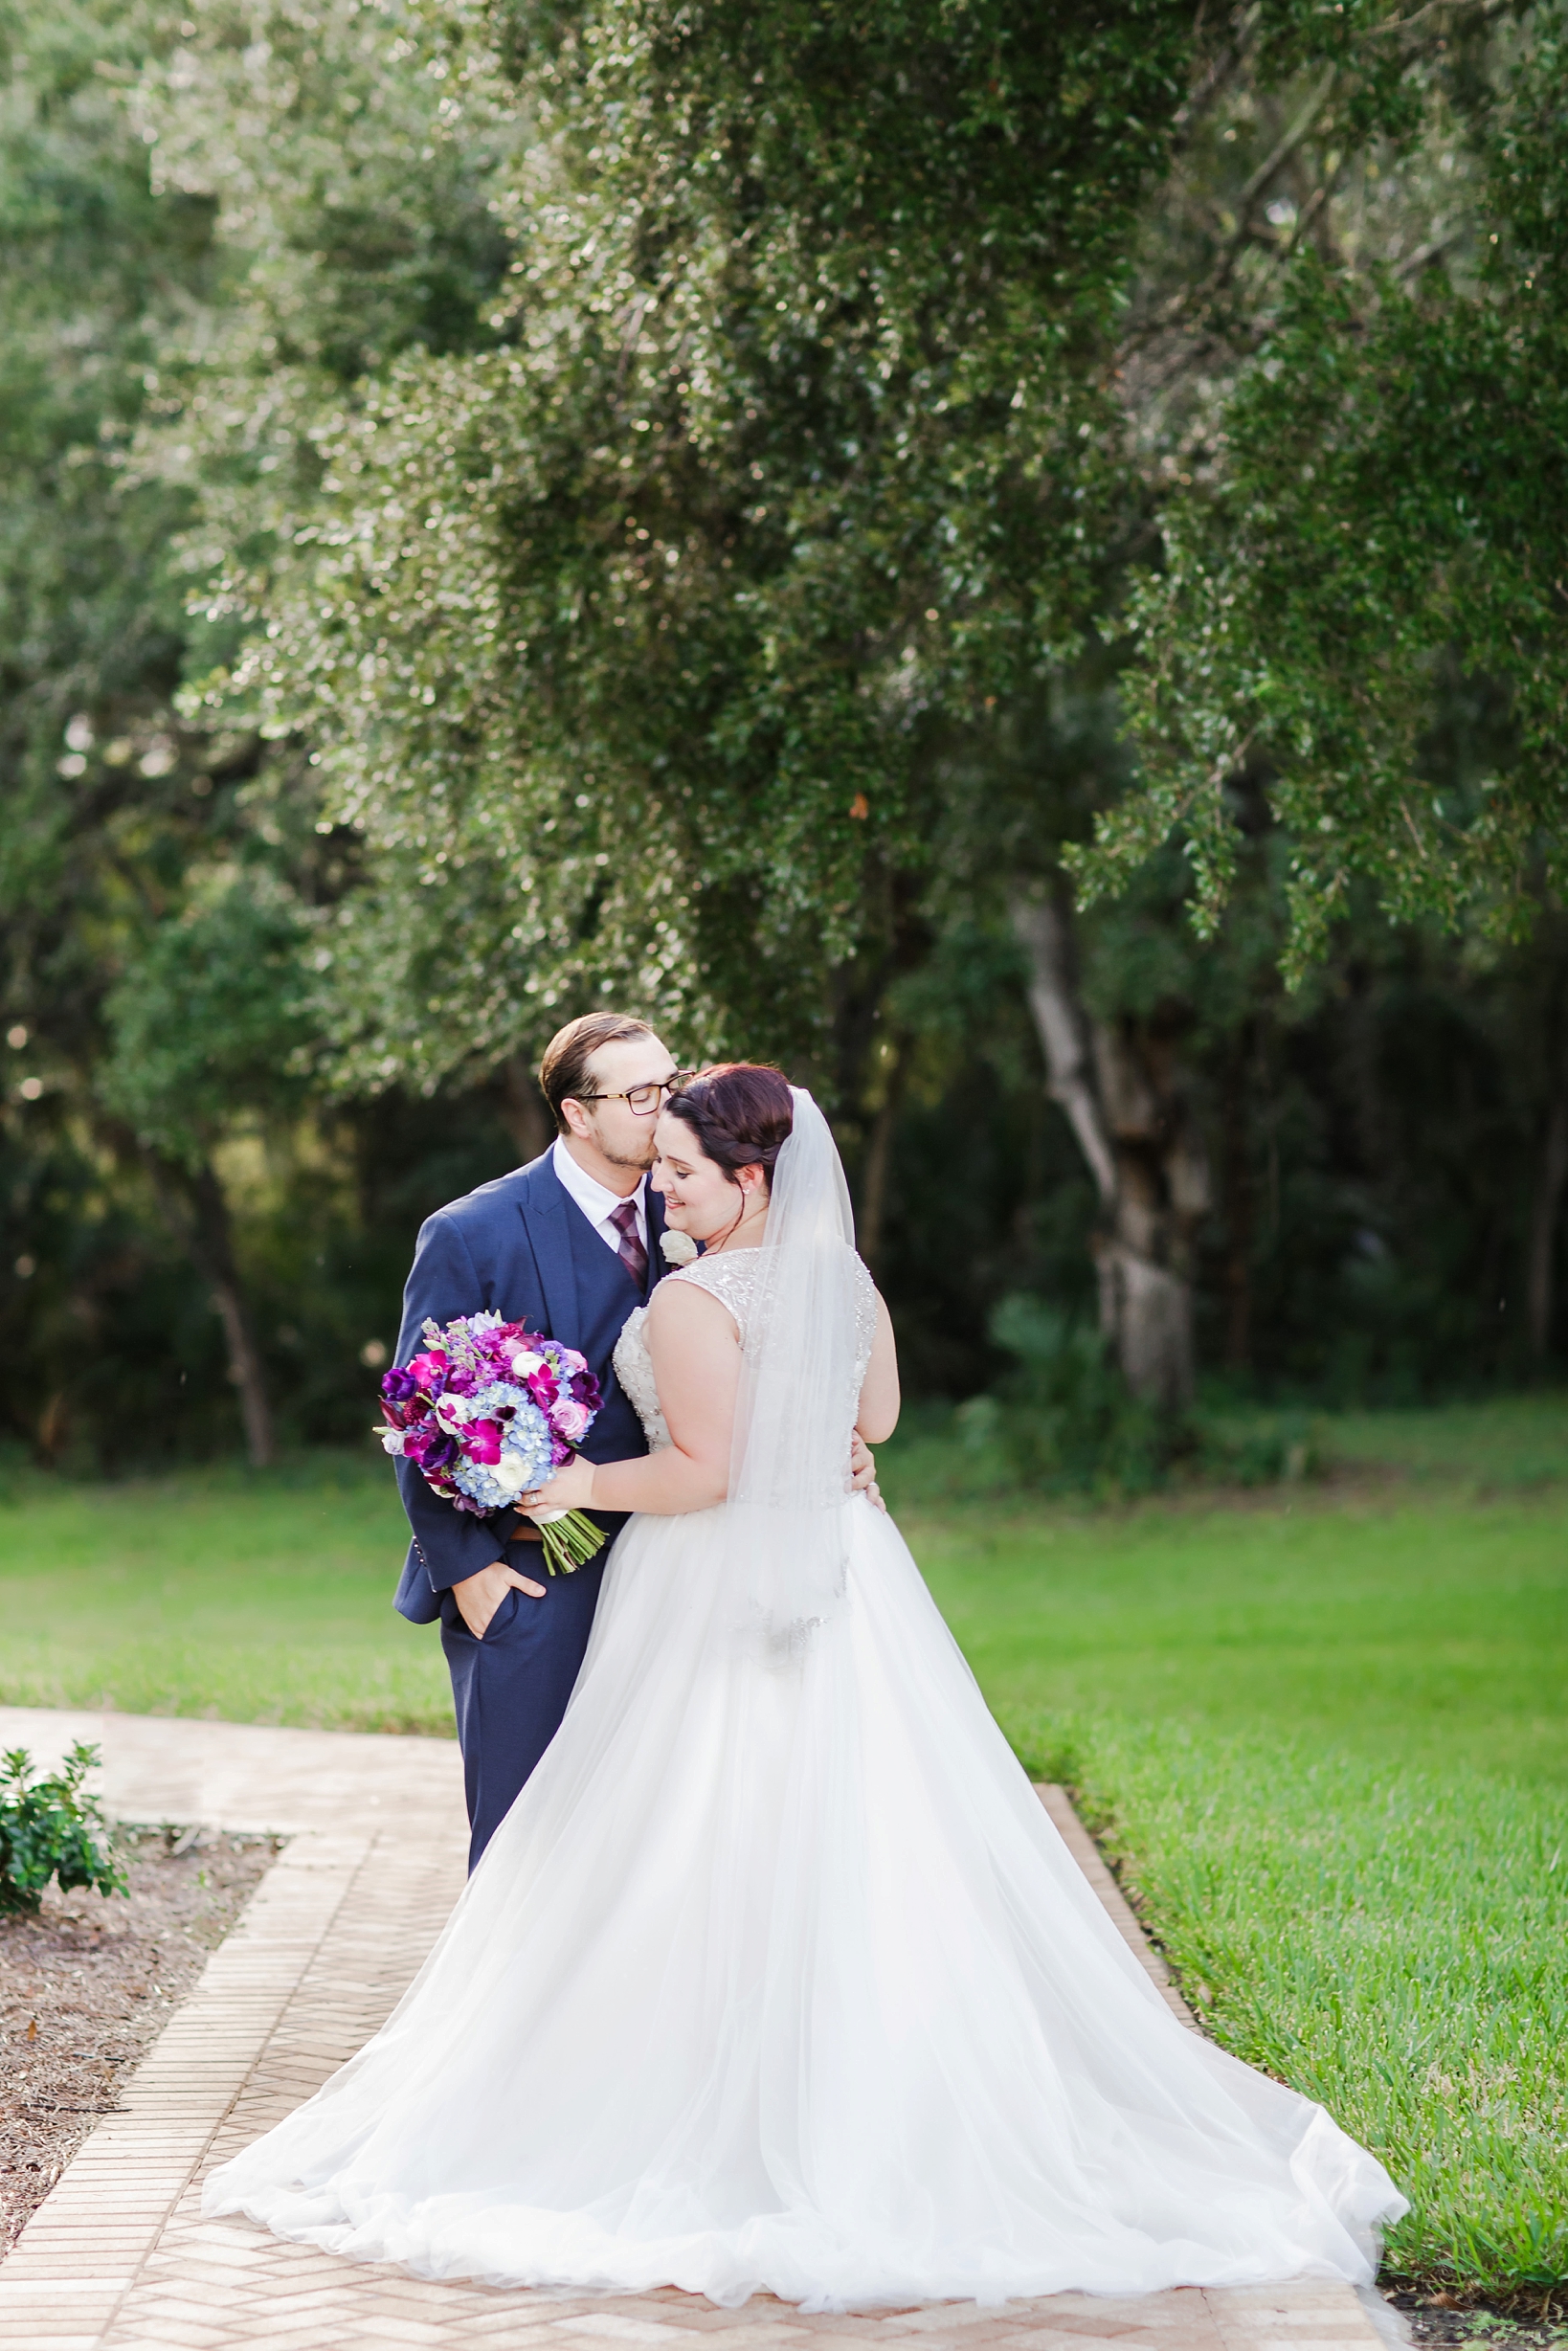 A beautiful wedding couple sharing a nice moment under the oak trees of the chapel grounds by Sarah & Ben Photography